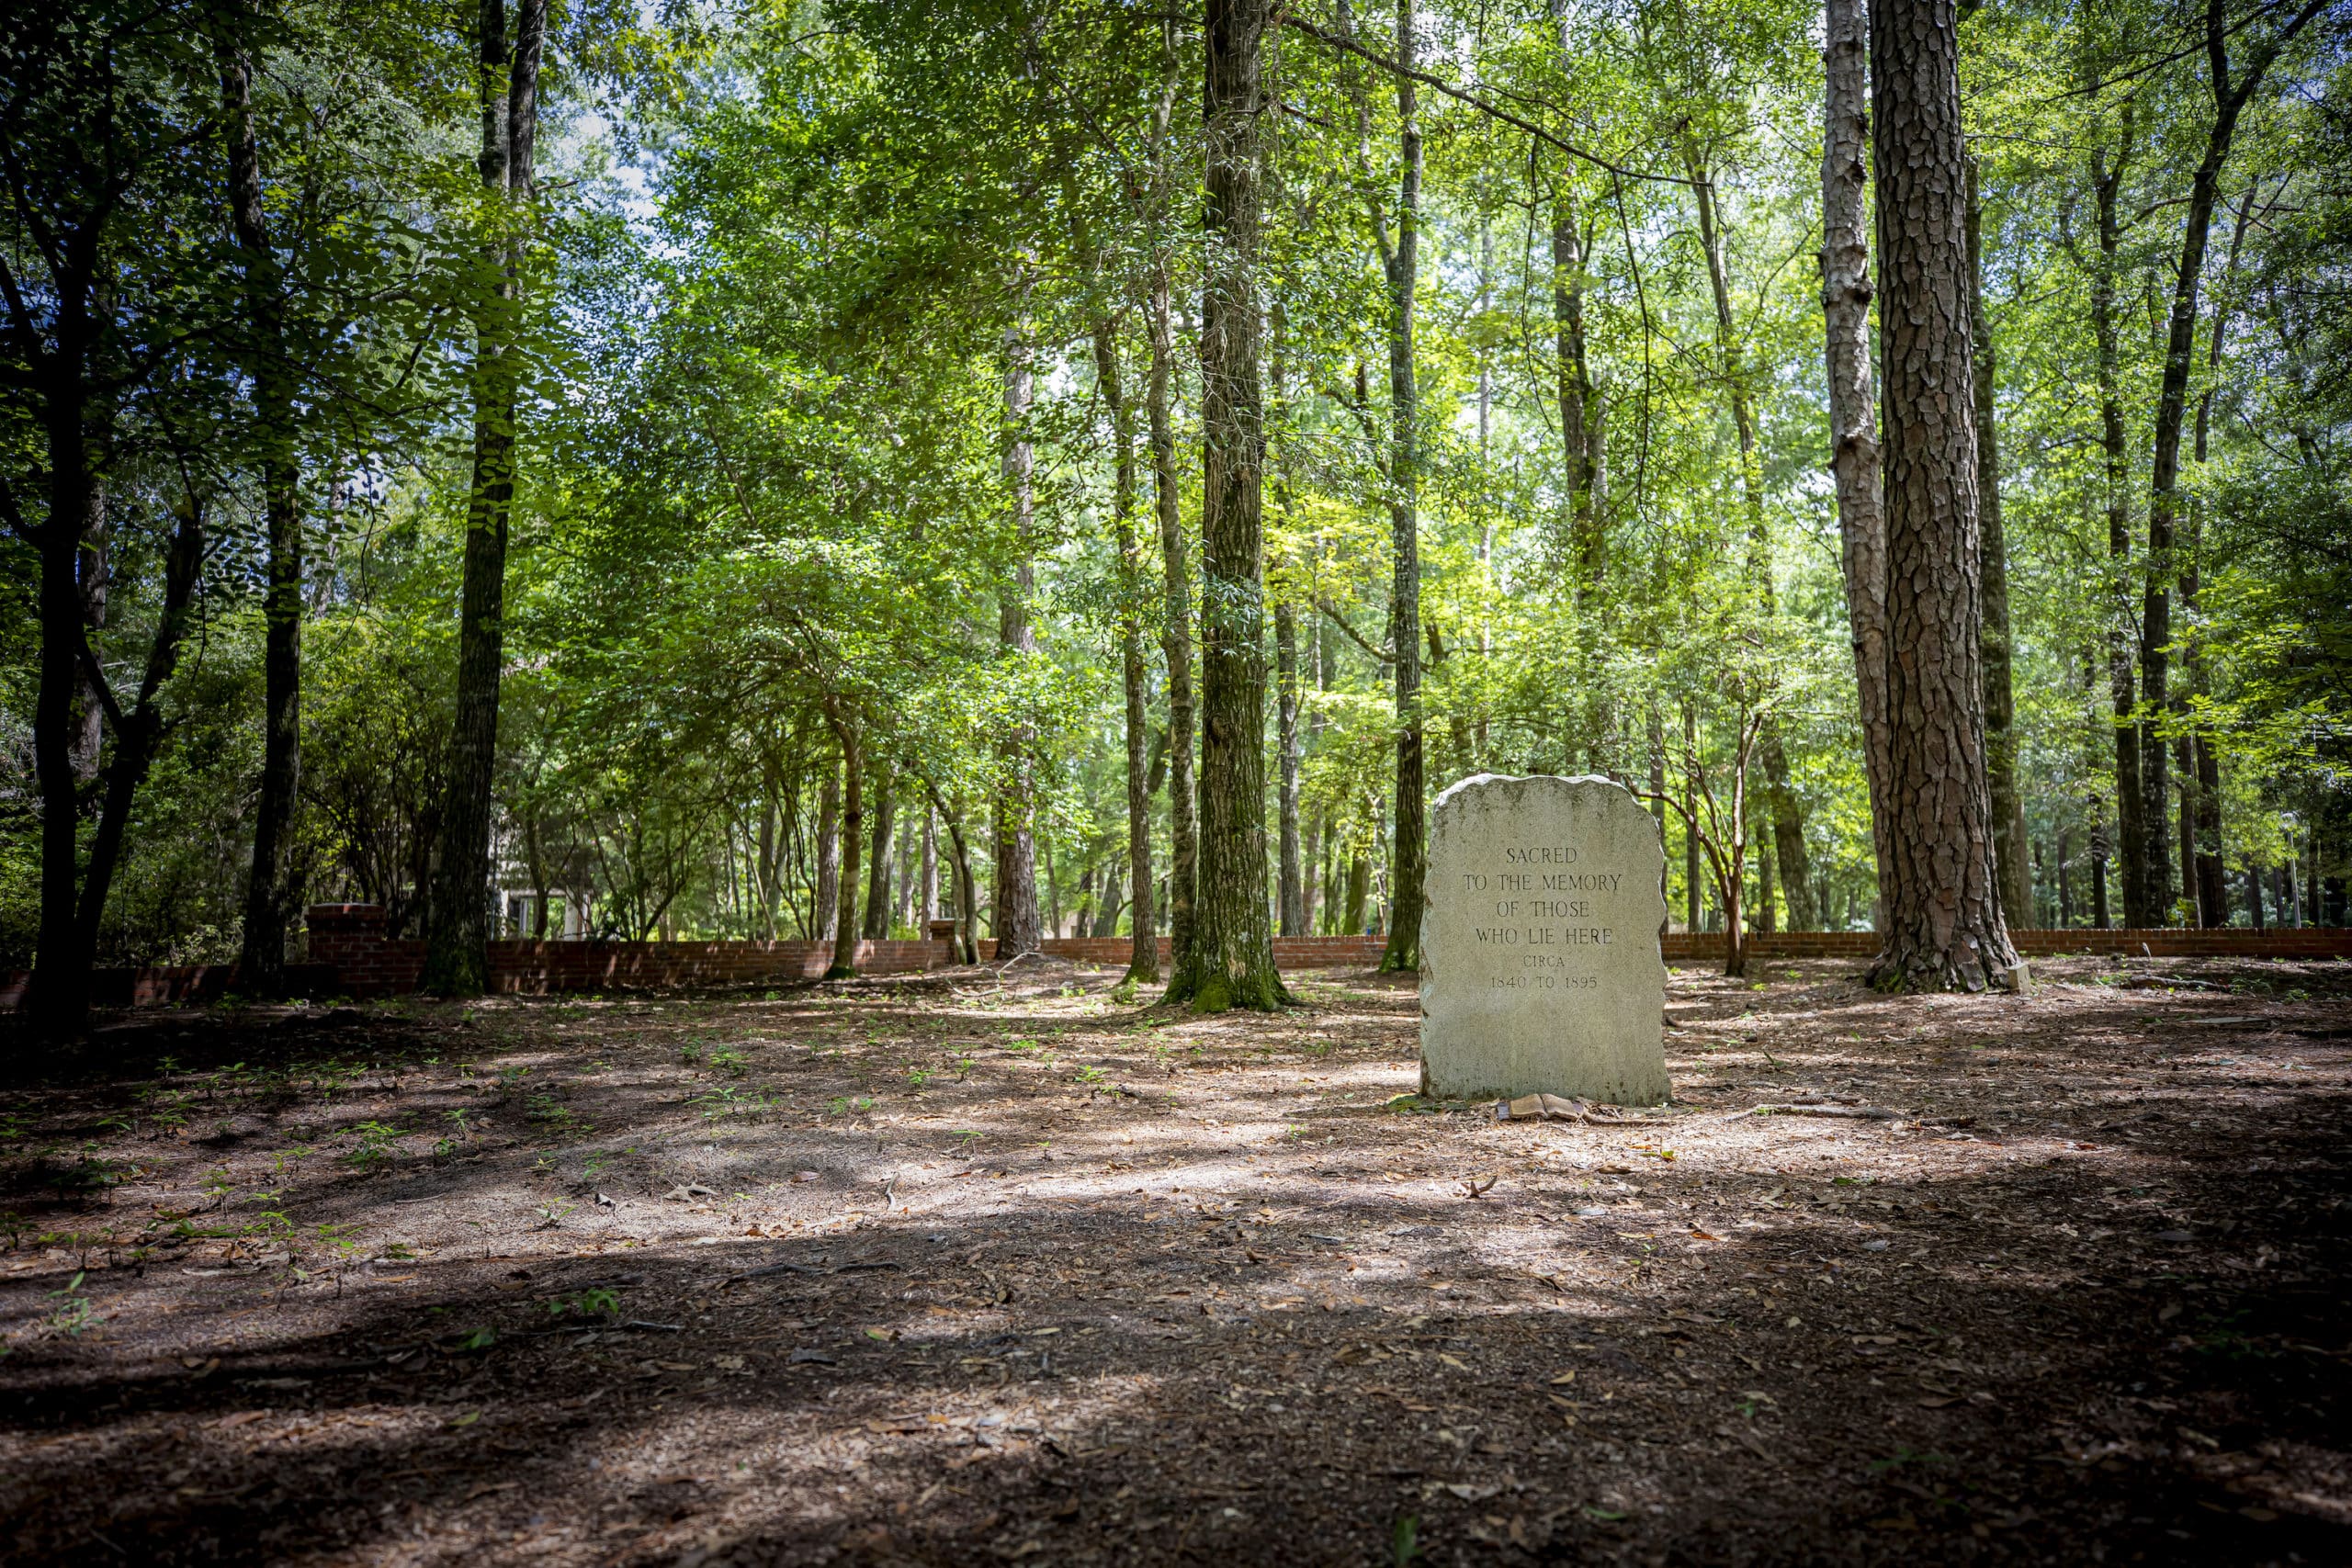 Special ceremony will commemorate historic cemetery on FMU campus